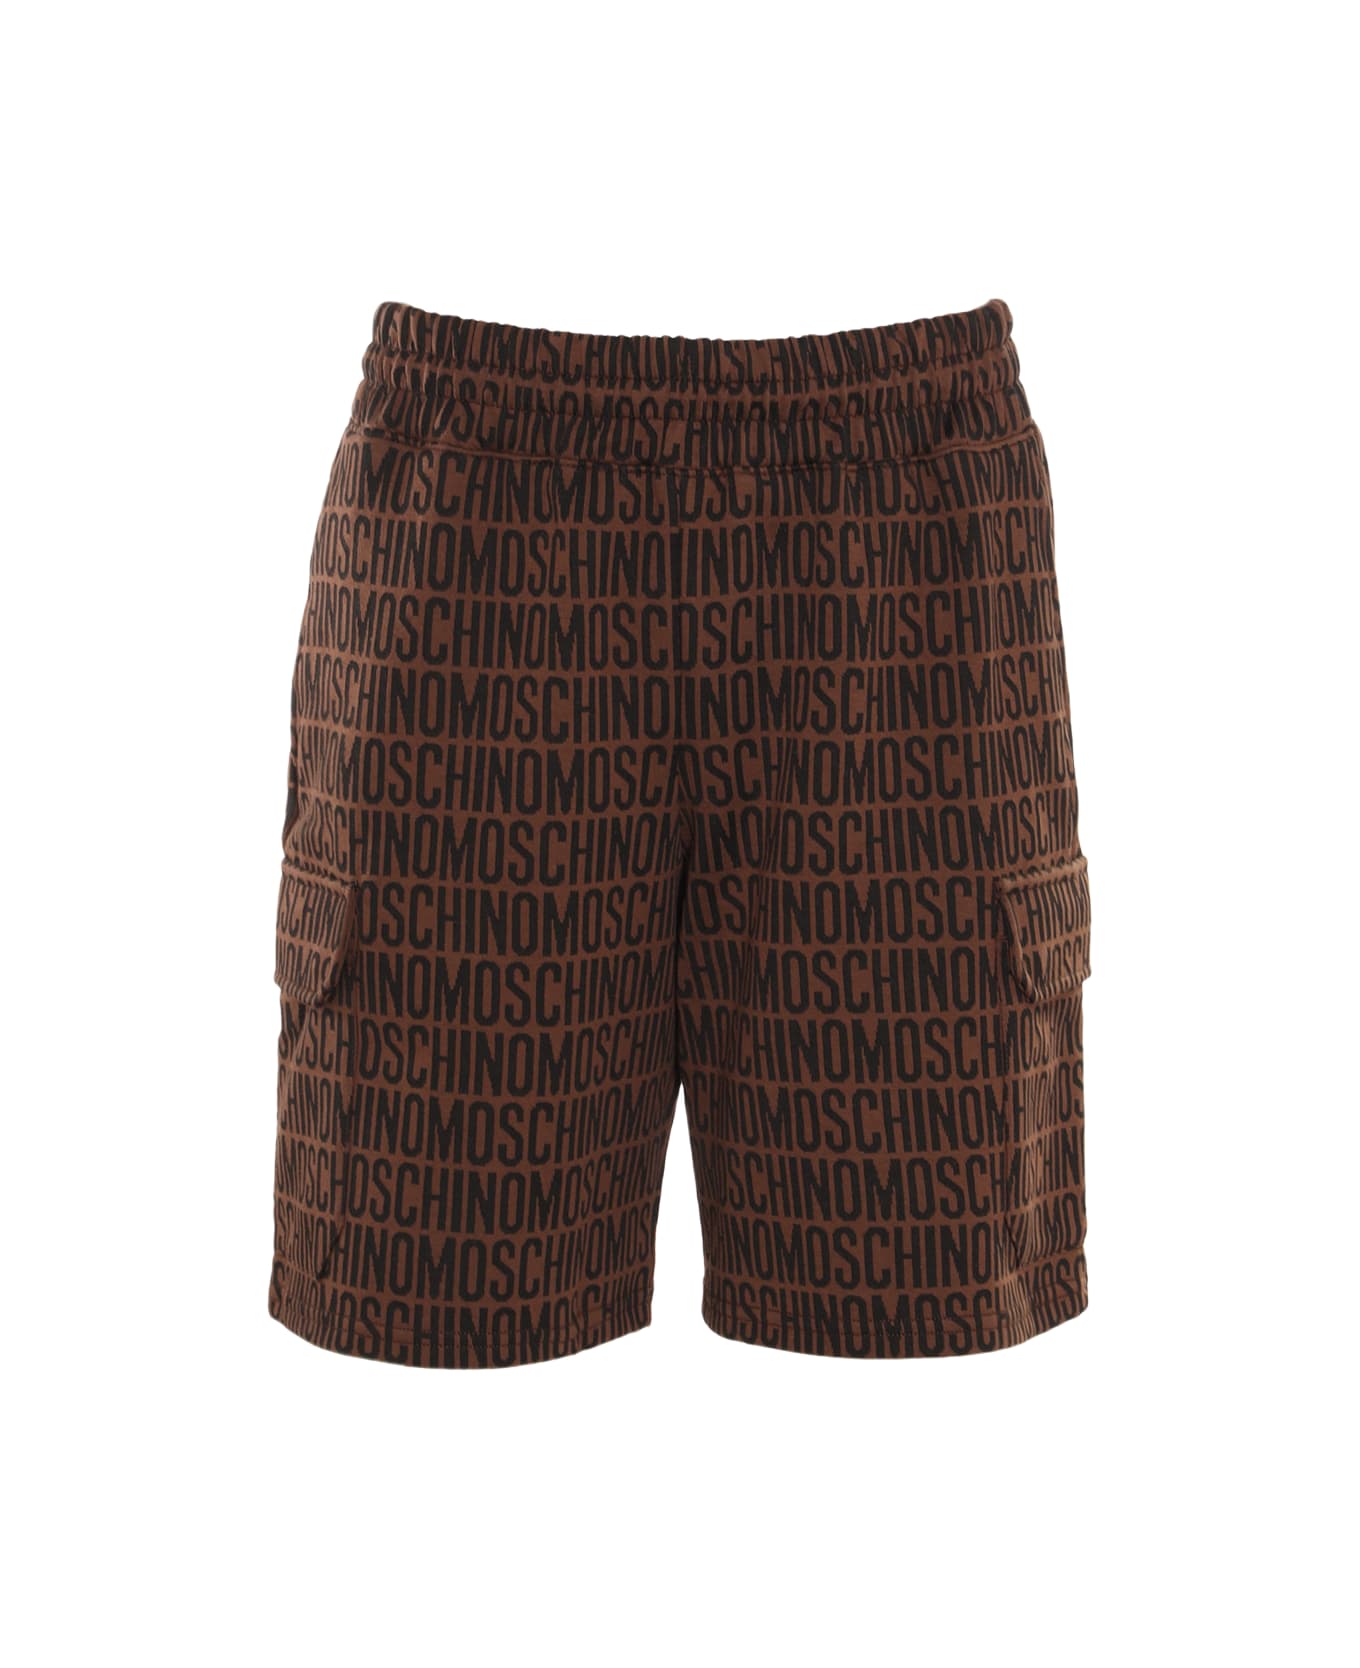 Moschino Brown And Black Cotton Shorts - Brown